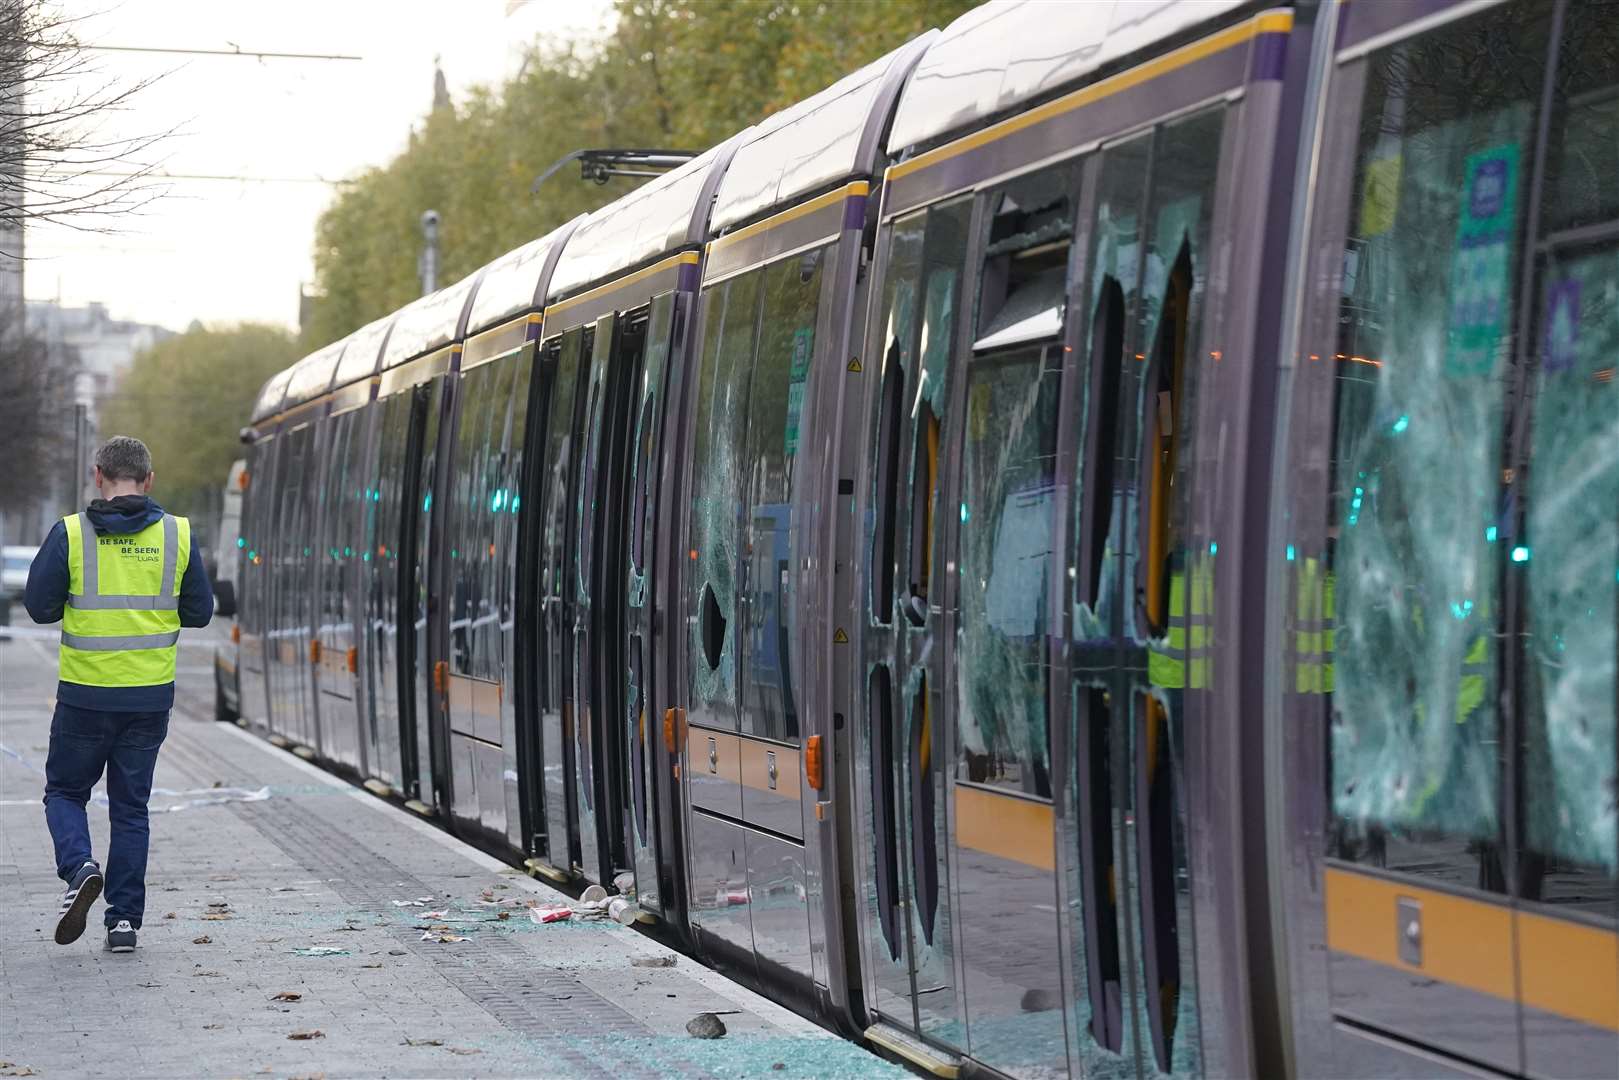 Trams were among the things damaged in the violence (Brian Lawless/PA)